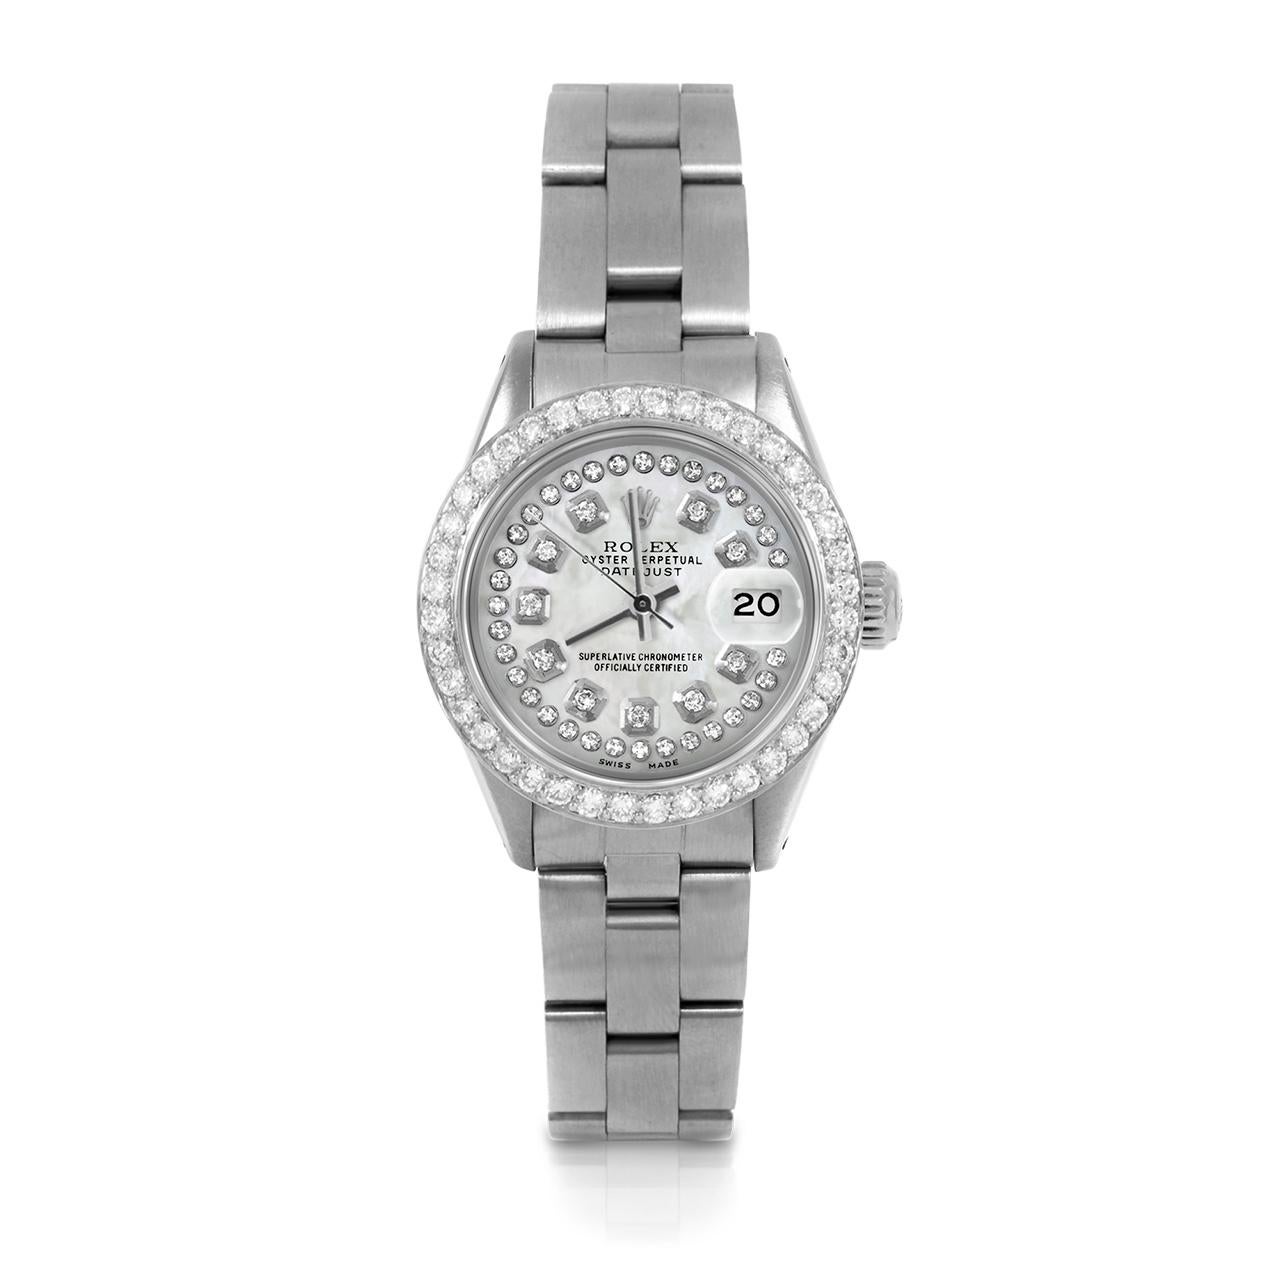 Pre-Owned Rolex 6917 Ladies 26mm Datejust Watch, Custom White Mother of Pearl String Diamond Dial & Custom 1ct Diamond Bezel on Rolex Stainless Steel Oyster Band.   

SKU 6917-SS-WMOP-STRD-BDS-OYS


Brand/Model:        Rolex Datejust
Model Number:  